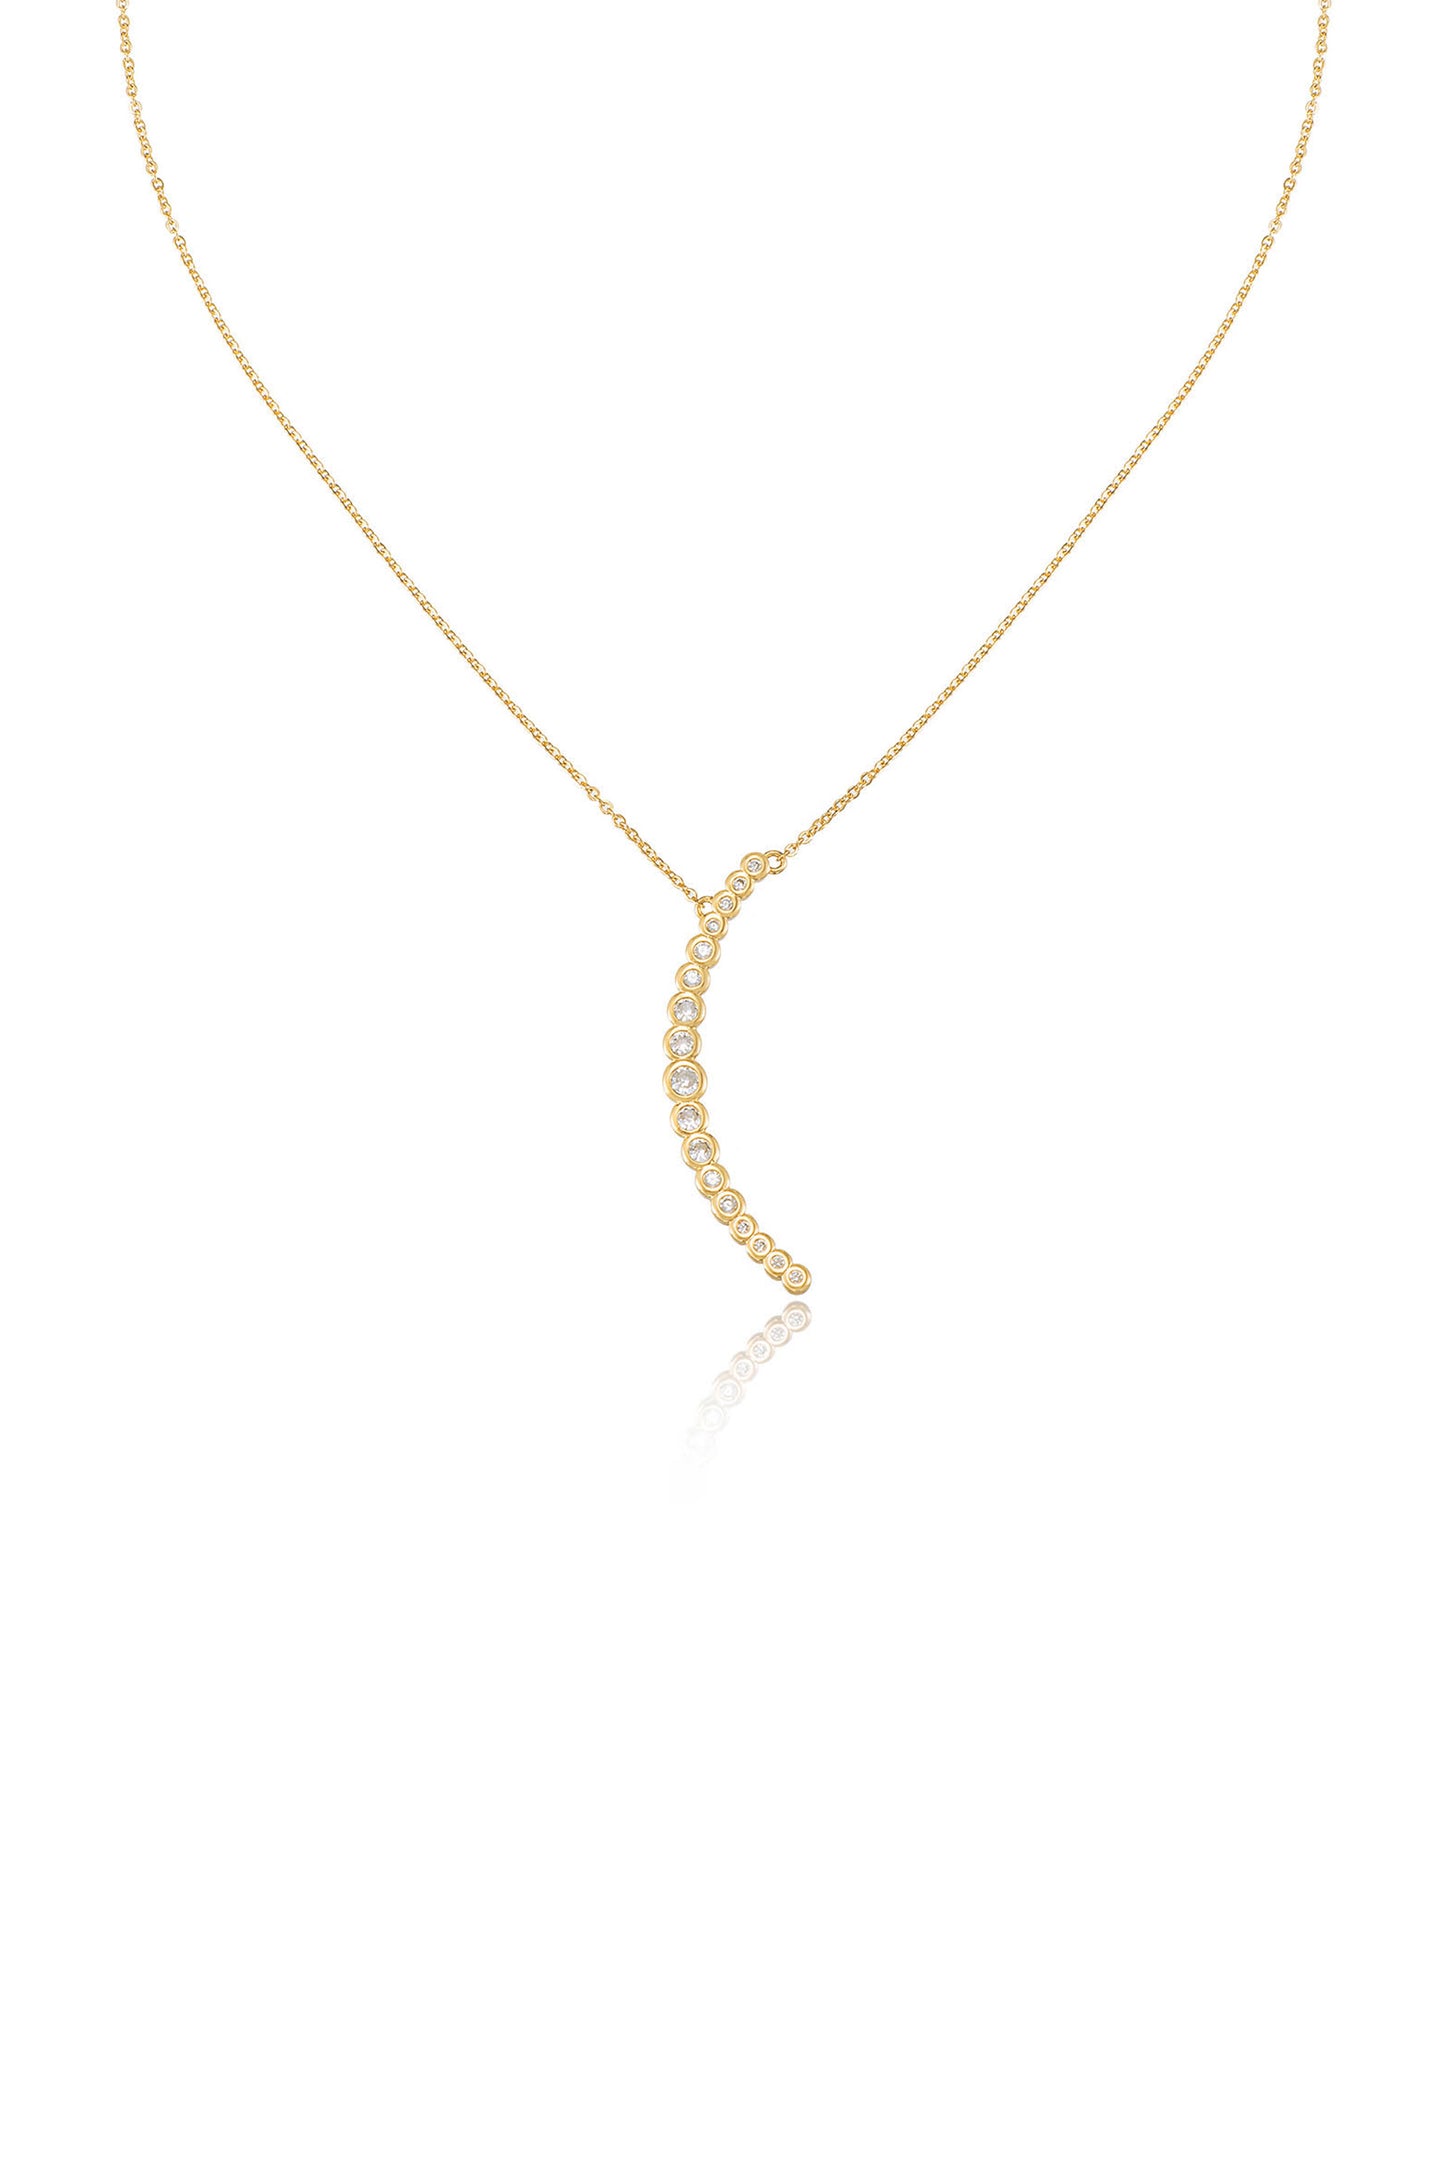 Waning Crystal Crescent Moon 18k Gold Plated Necklace